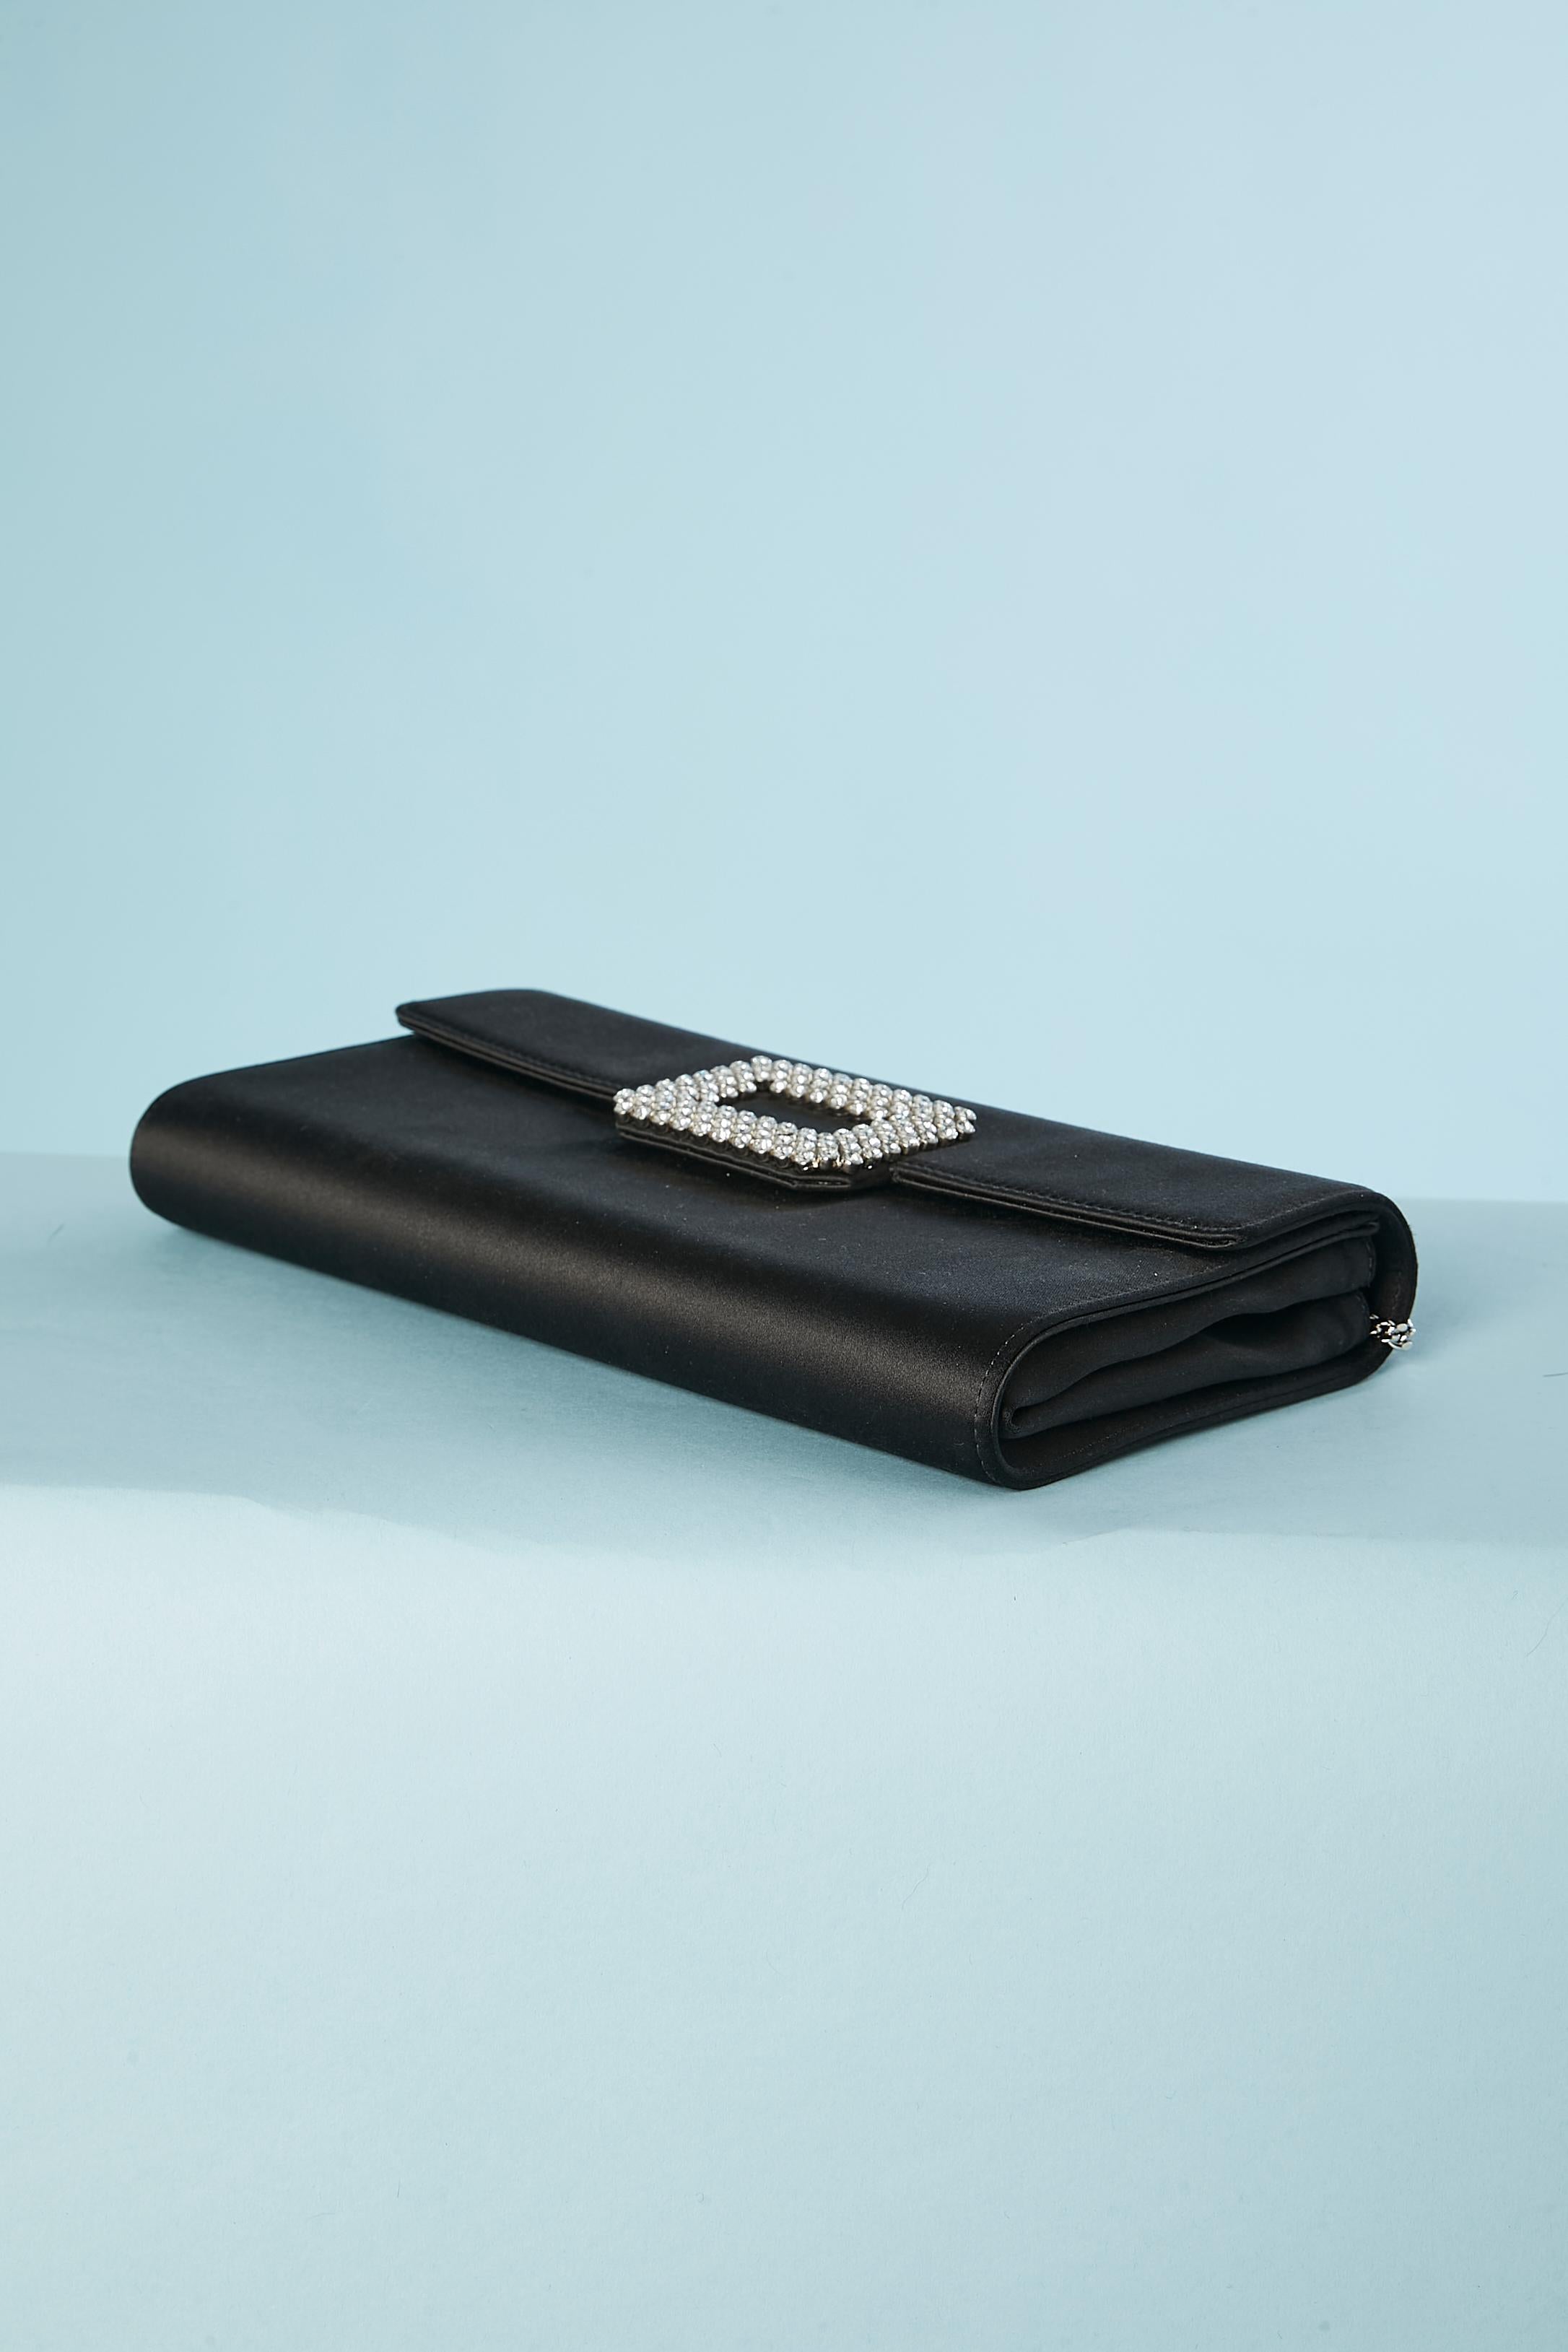 Women's Black satin and rhinestone evening clutch Roger Vivier 650€ For Sale